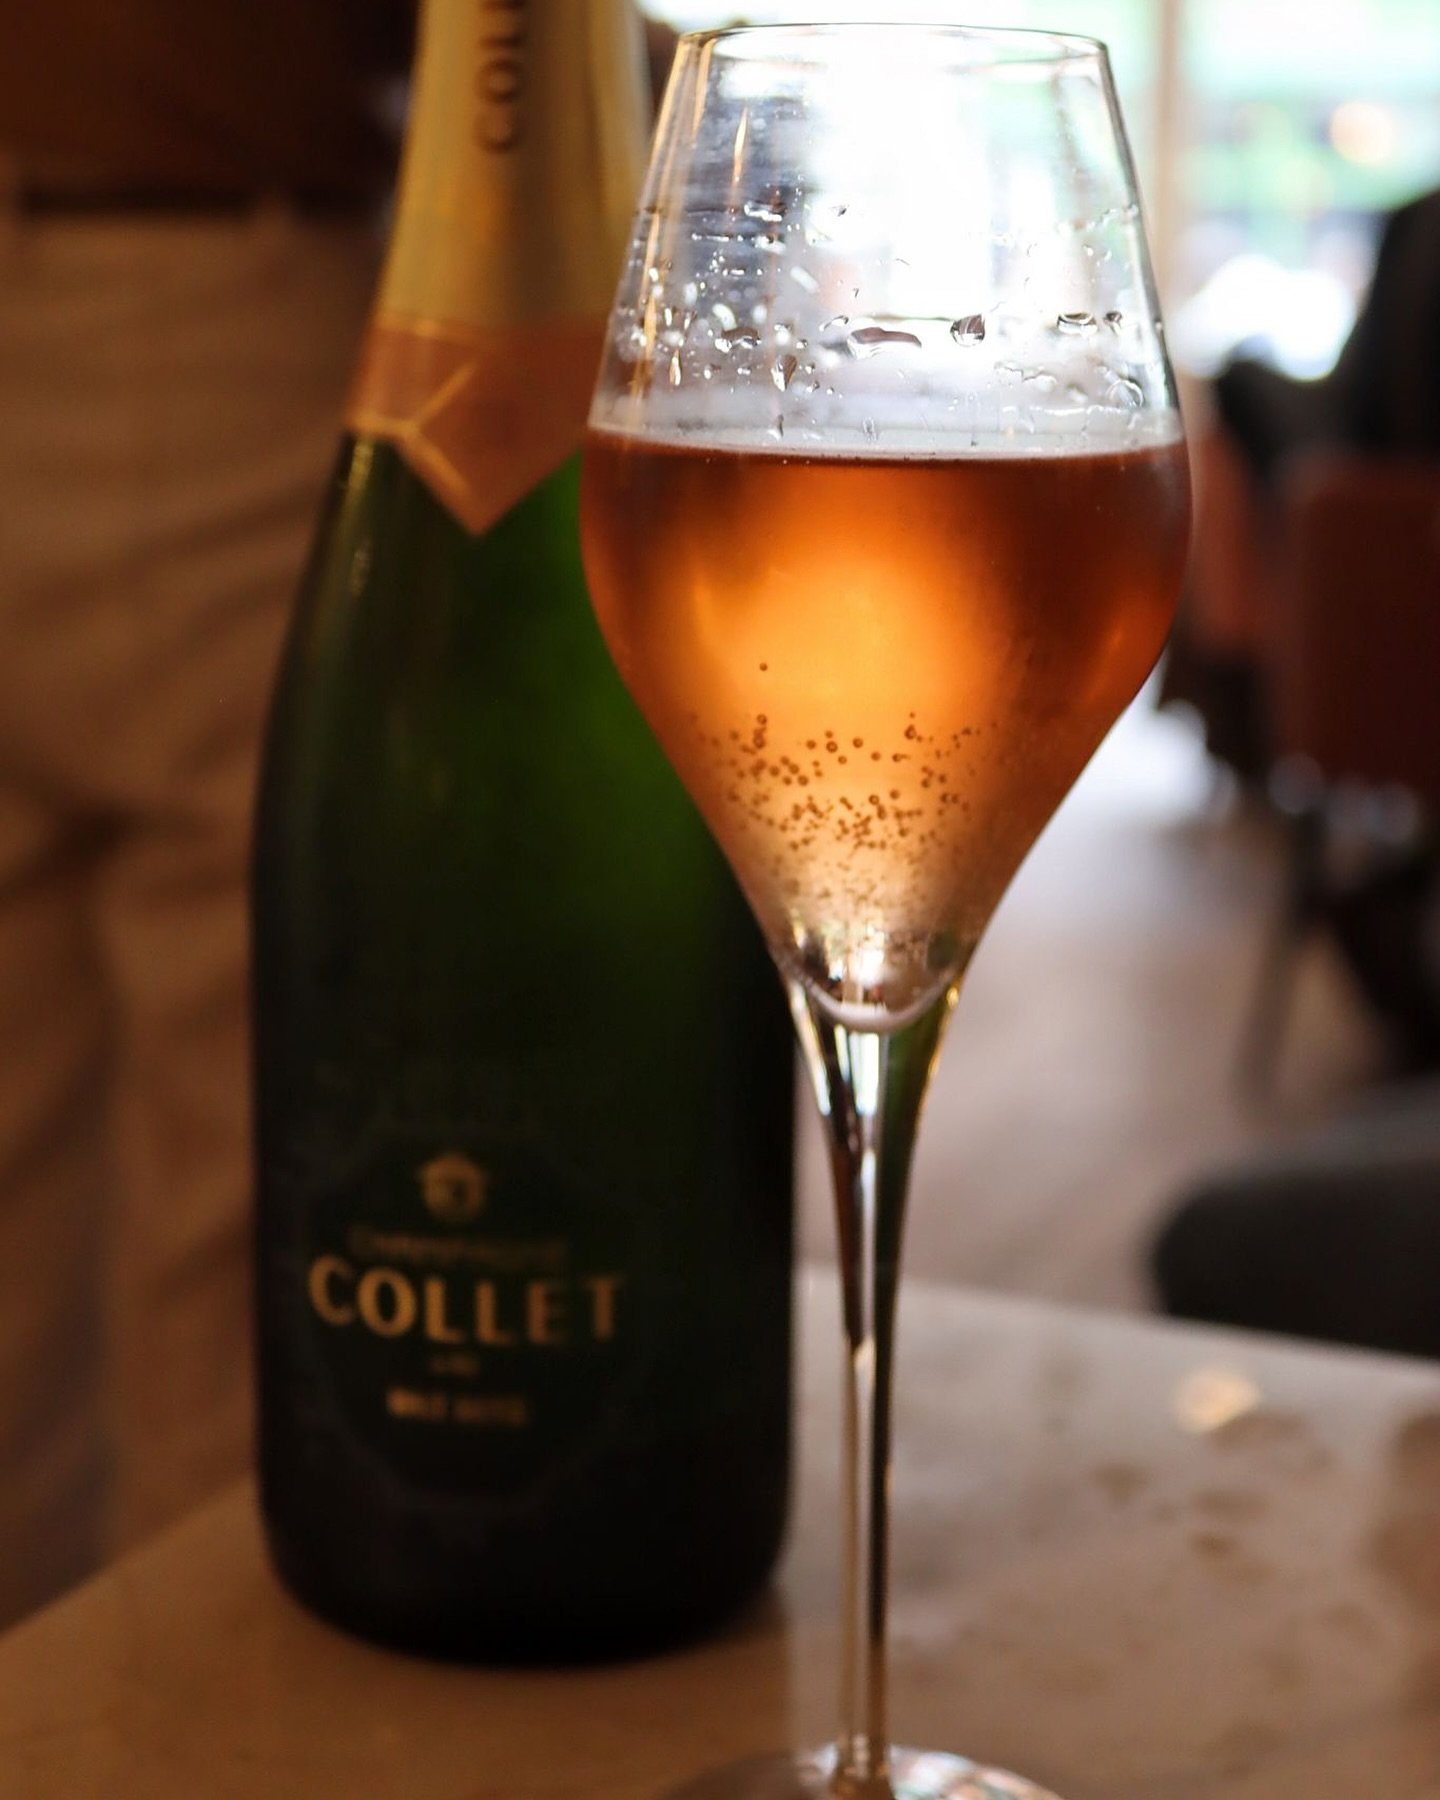 Fridays are our favourite&hellip; cheers to the bank holiday 🥂
.
.
.
.
#EnglandsGrace #Champagne #Collet #tgif #bankholiday #drinklocal #stjohnswood #londonrestaurants